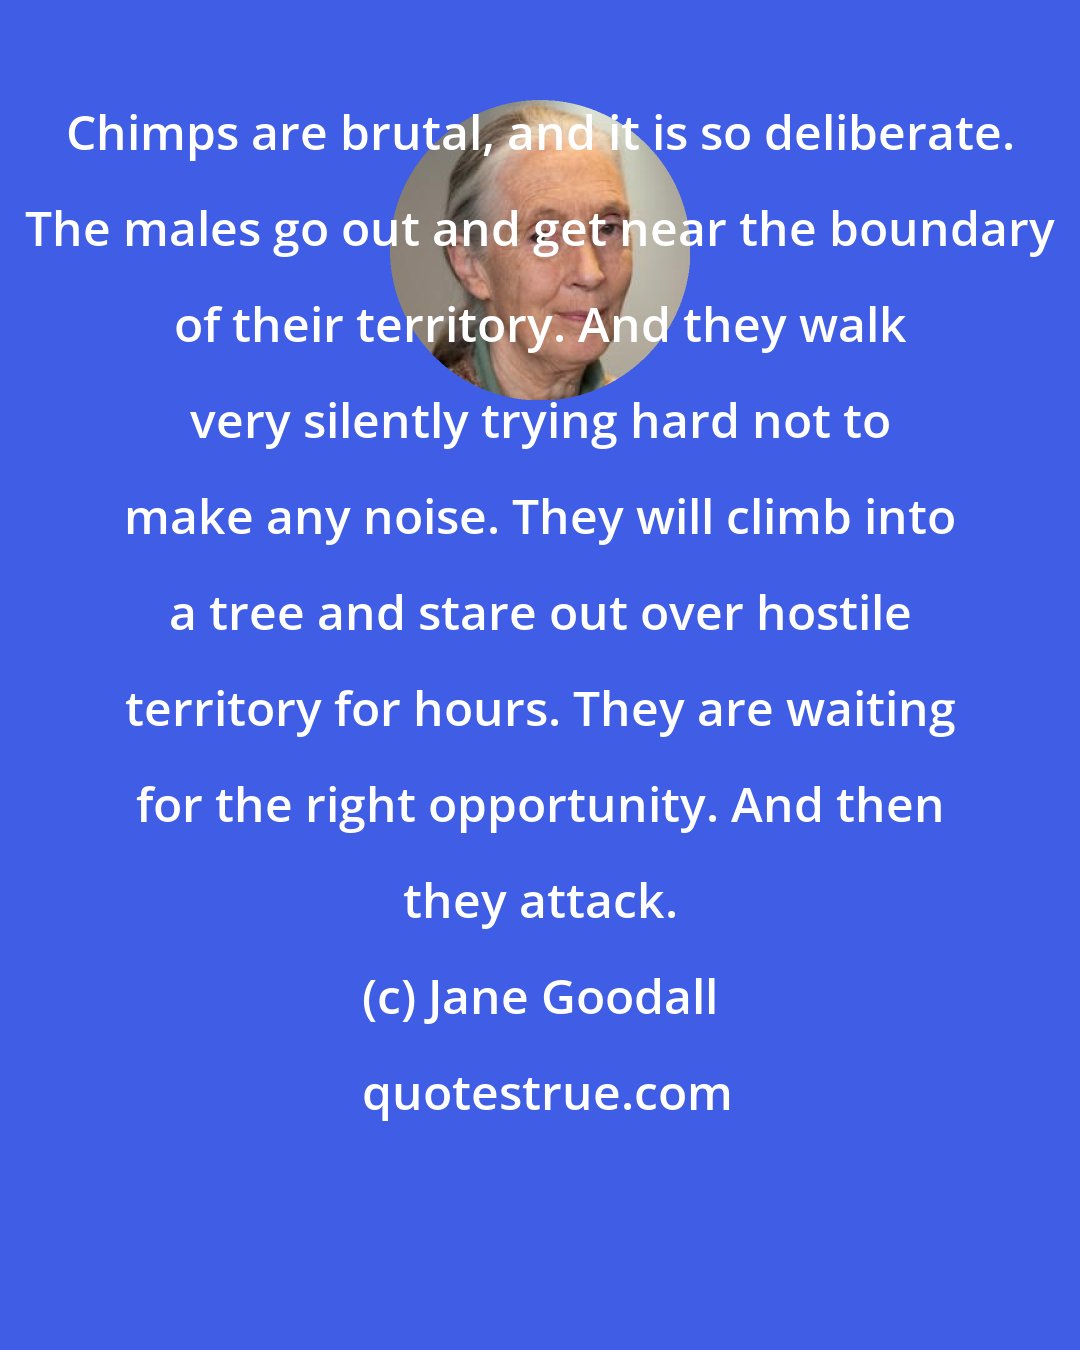 Jane Goodall: Chimps are brutal, and it is so deliberate. The males go out and get near the boundary of their territory. And they walk very silently trying hard not to make any noise. They will climb into a tree and stare out over hostile territory for hours. They are waiting for the right opportunity. And then they attack.